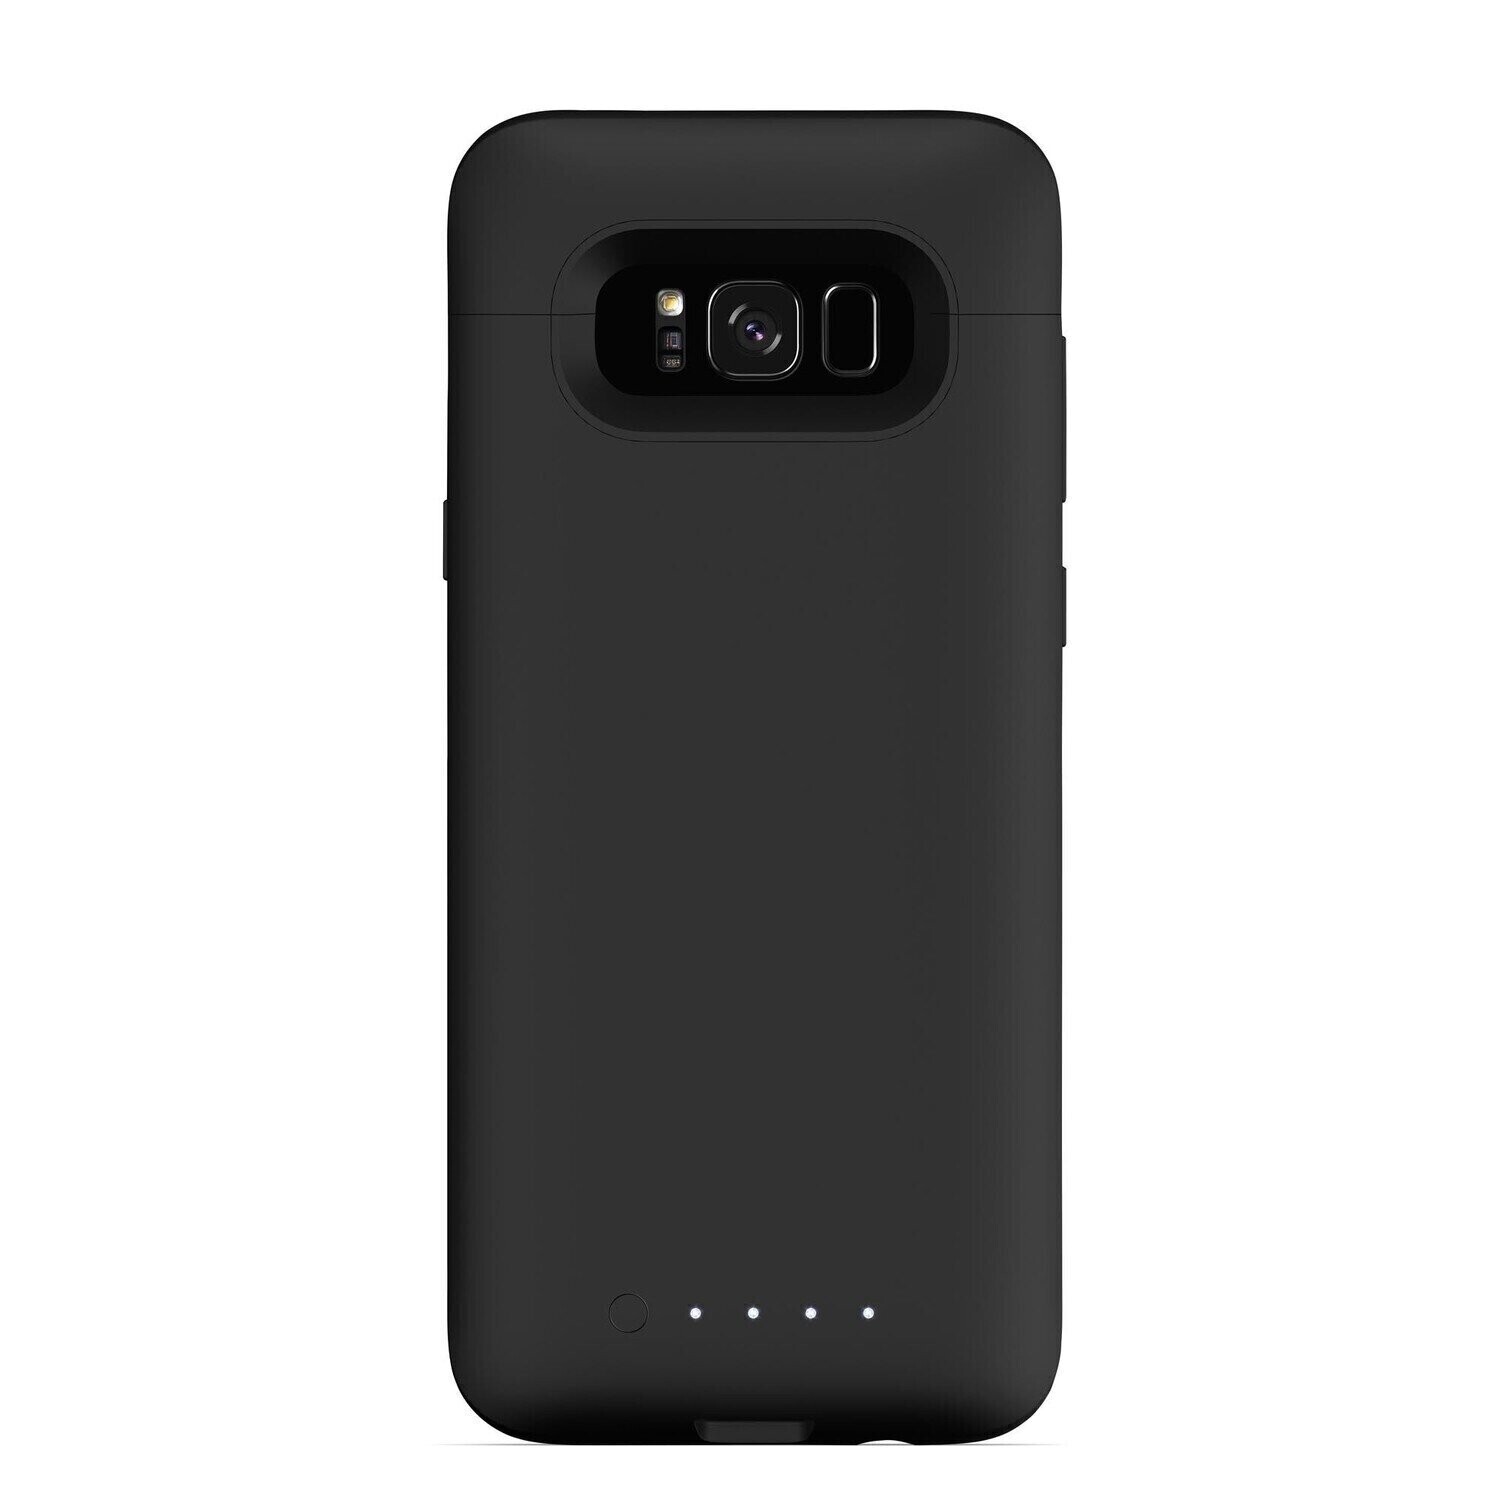 Mophie Samsung Galaxy S8 Juice Pack Air Charge Force Wireless Battery Case (2,950mAh), Black